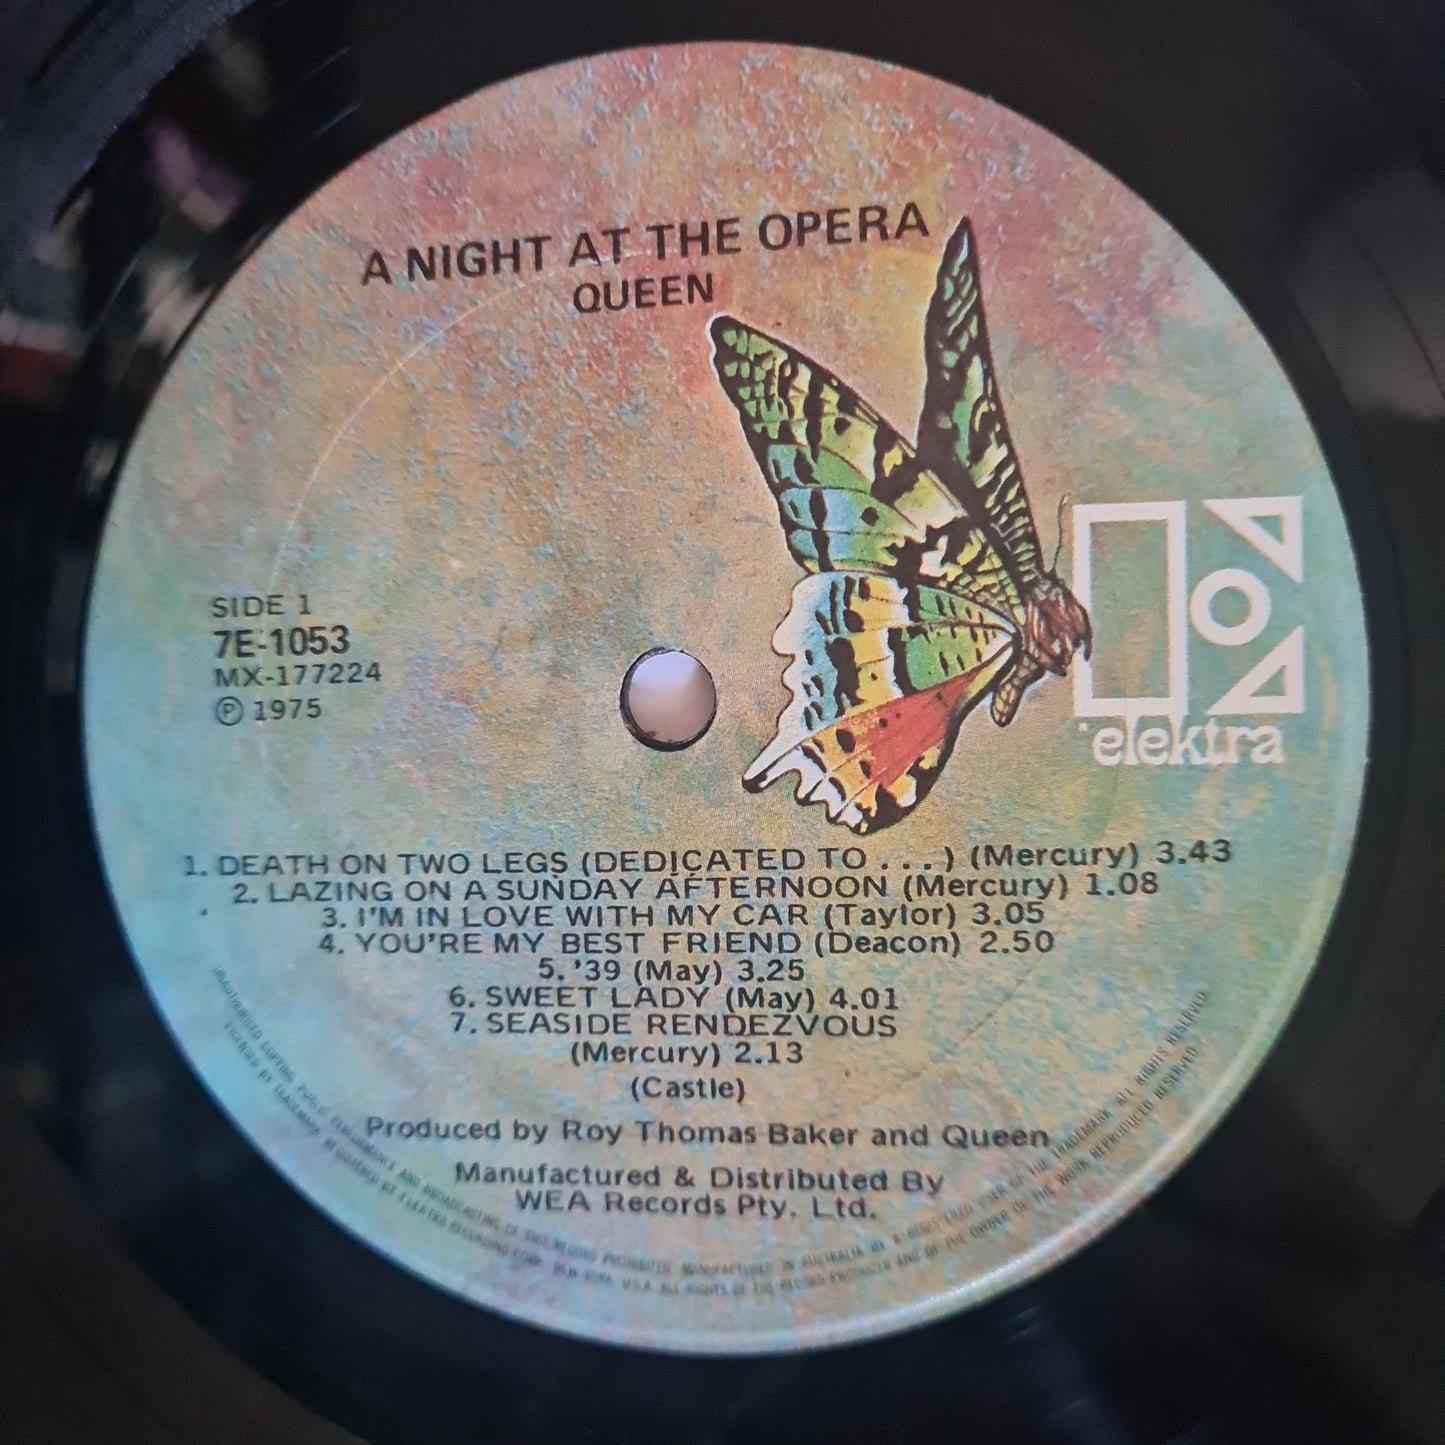 Queen – A Night At The Opera - 1975 - Vinyl Record